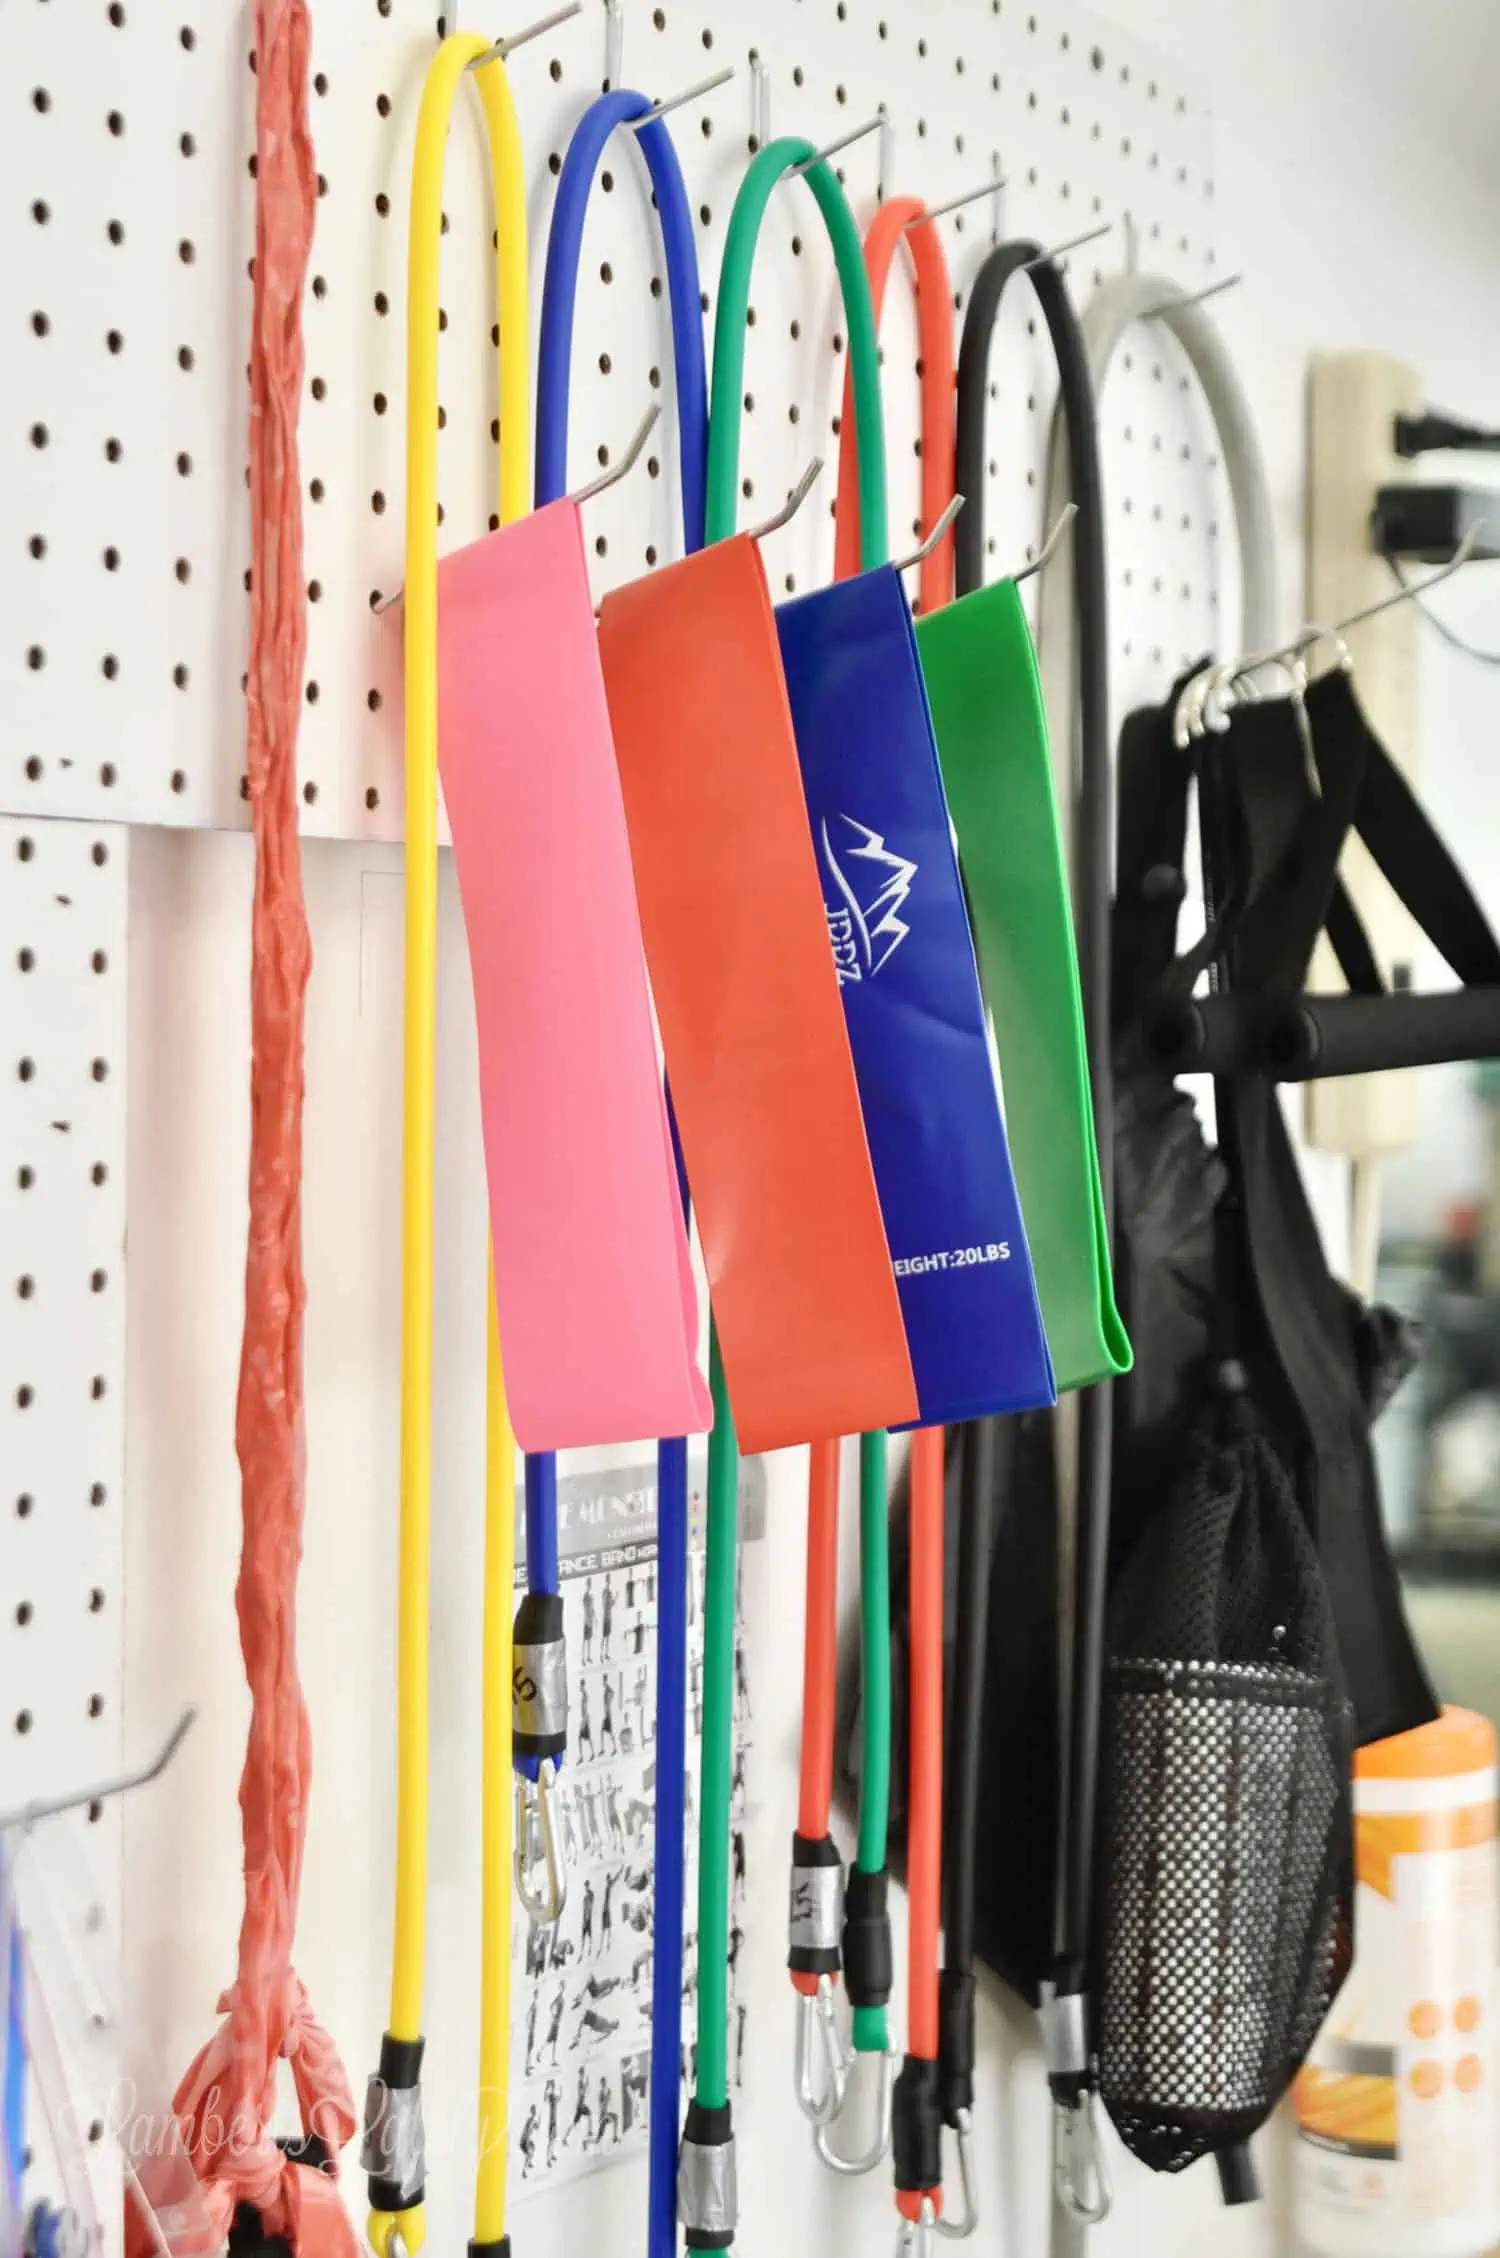 resistance bands hanging on a pegboard.